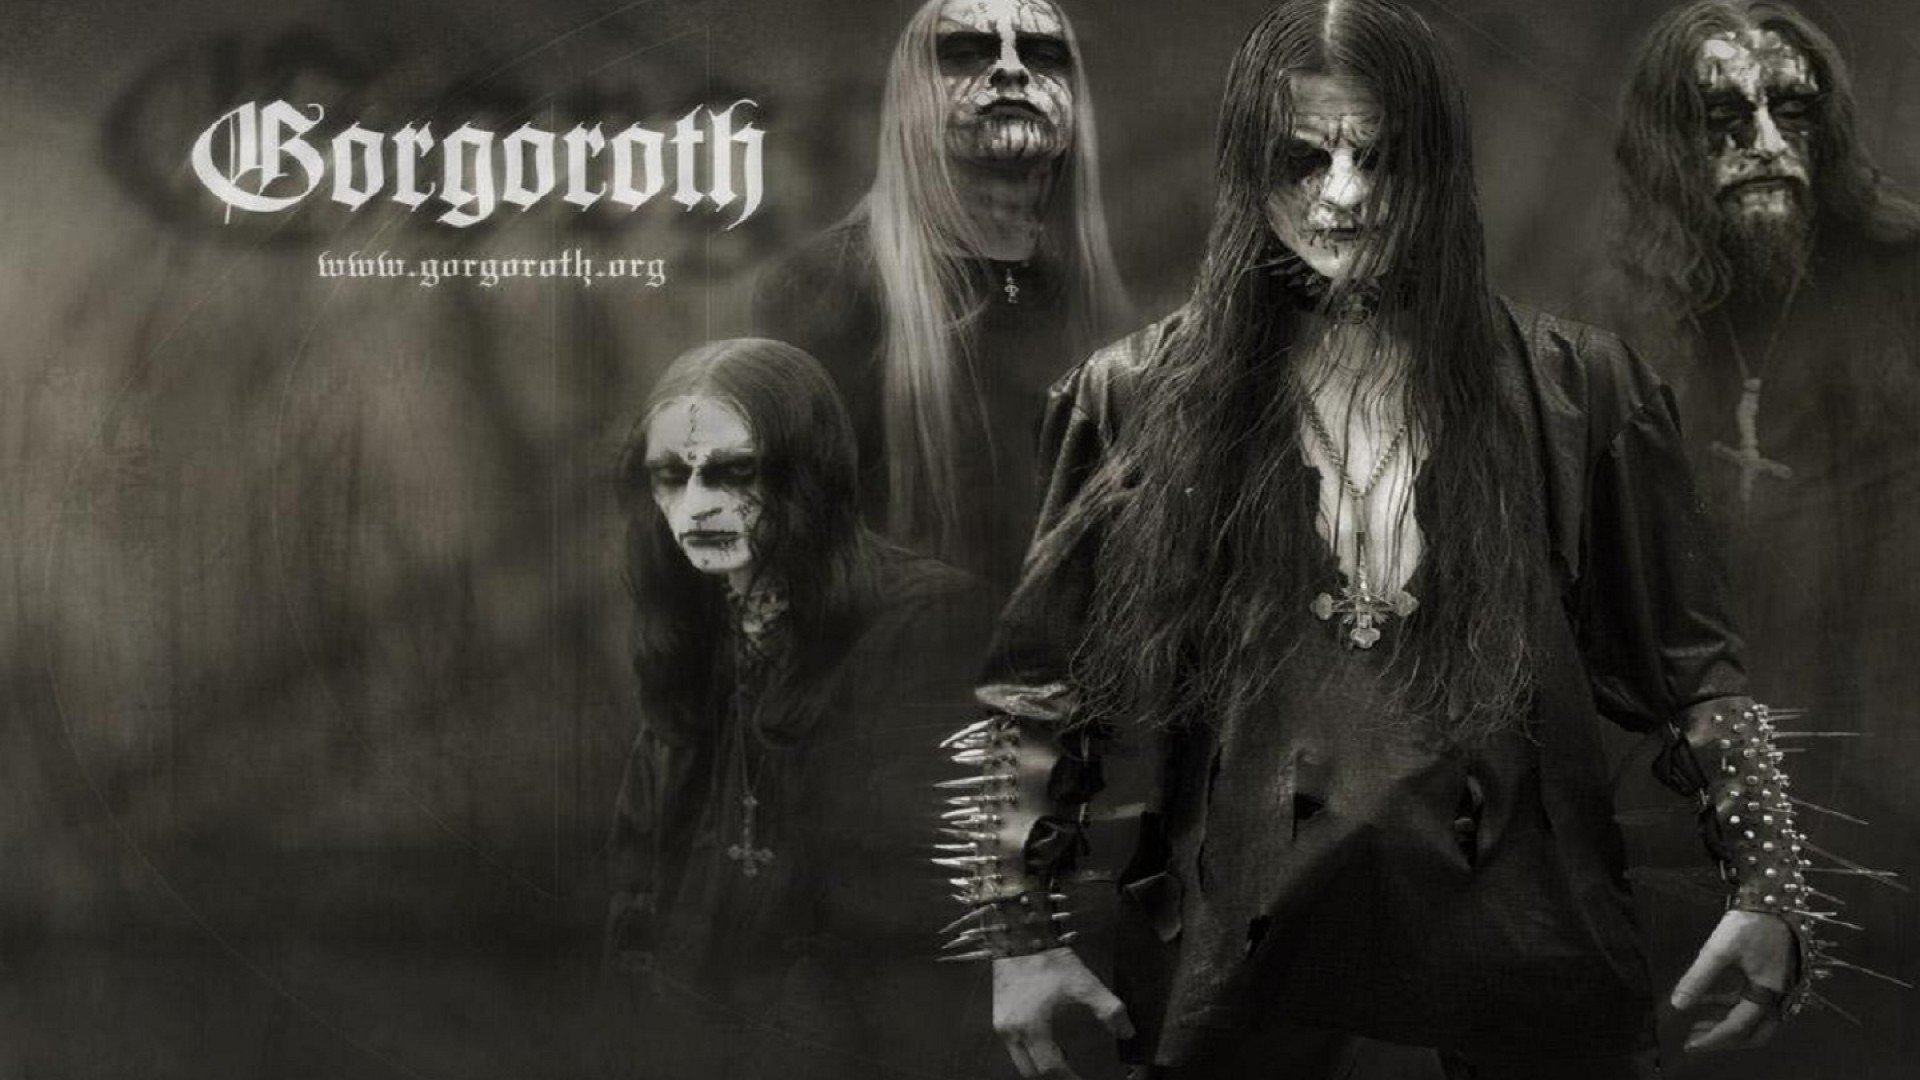 Download hd 1080p Gorgoroth PC wallpaper ID:387355 for free